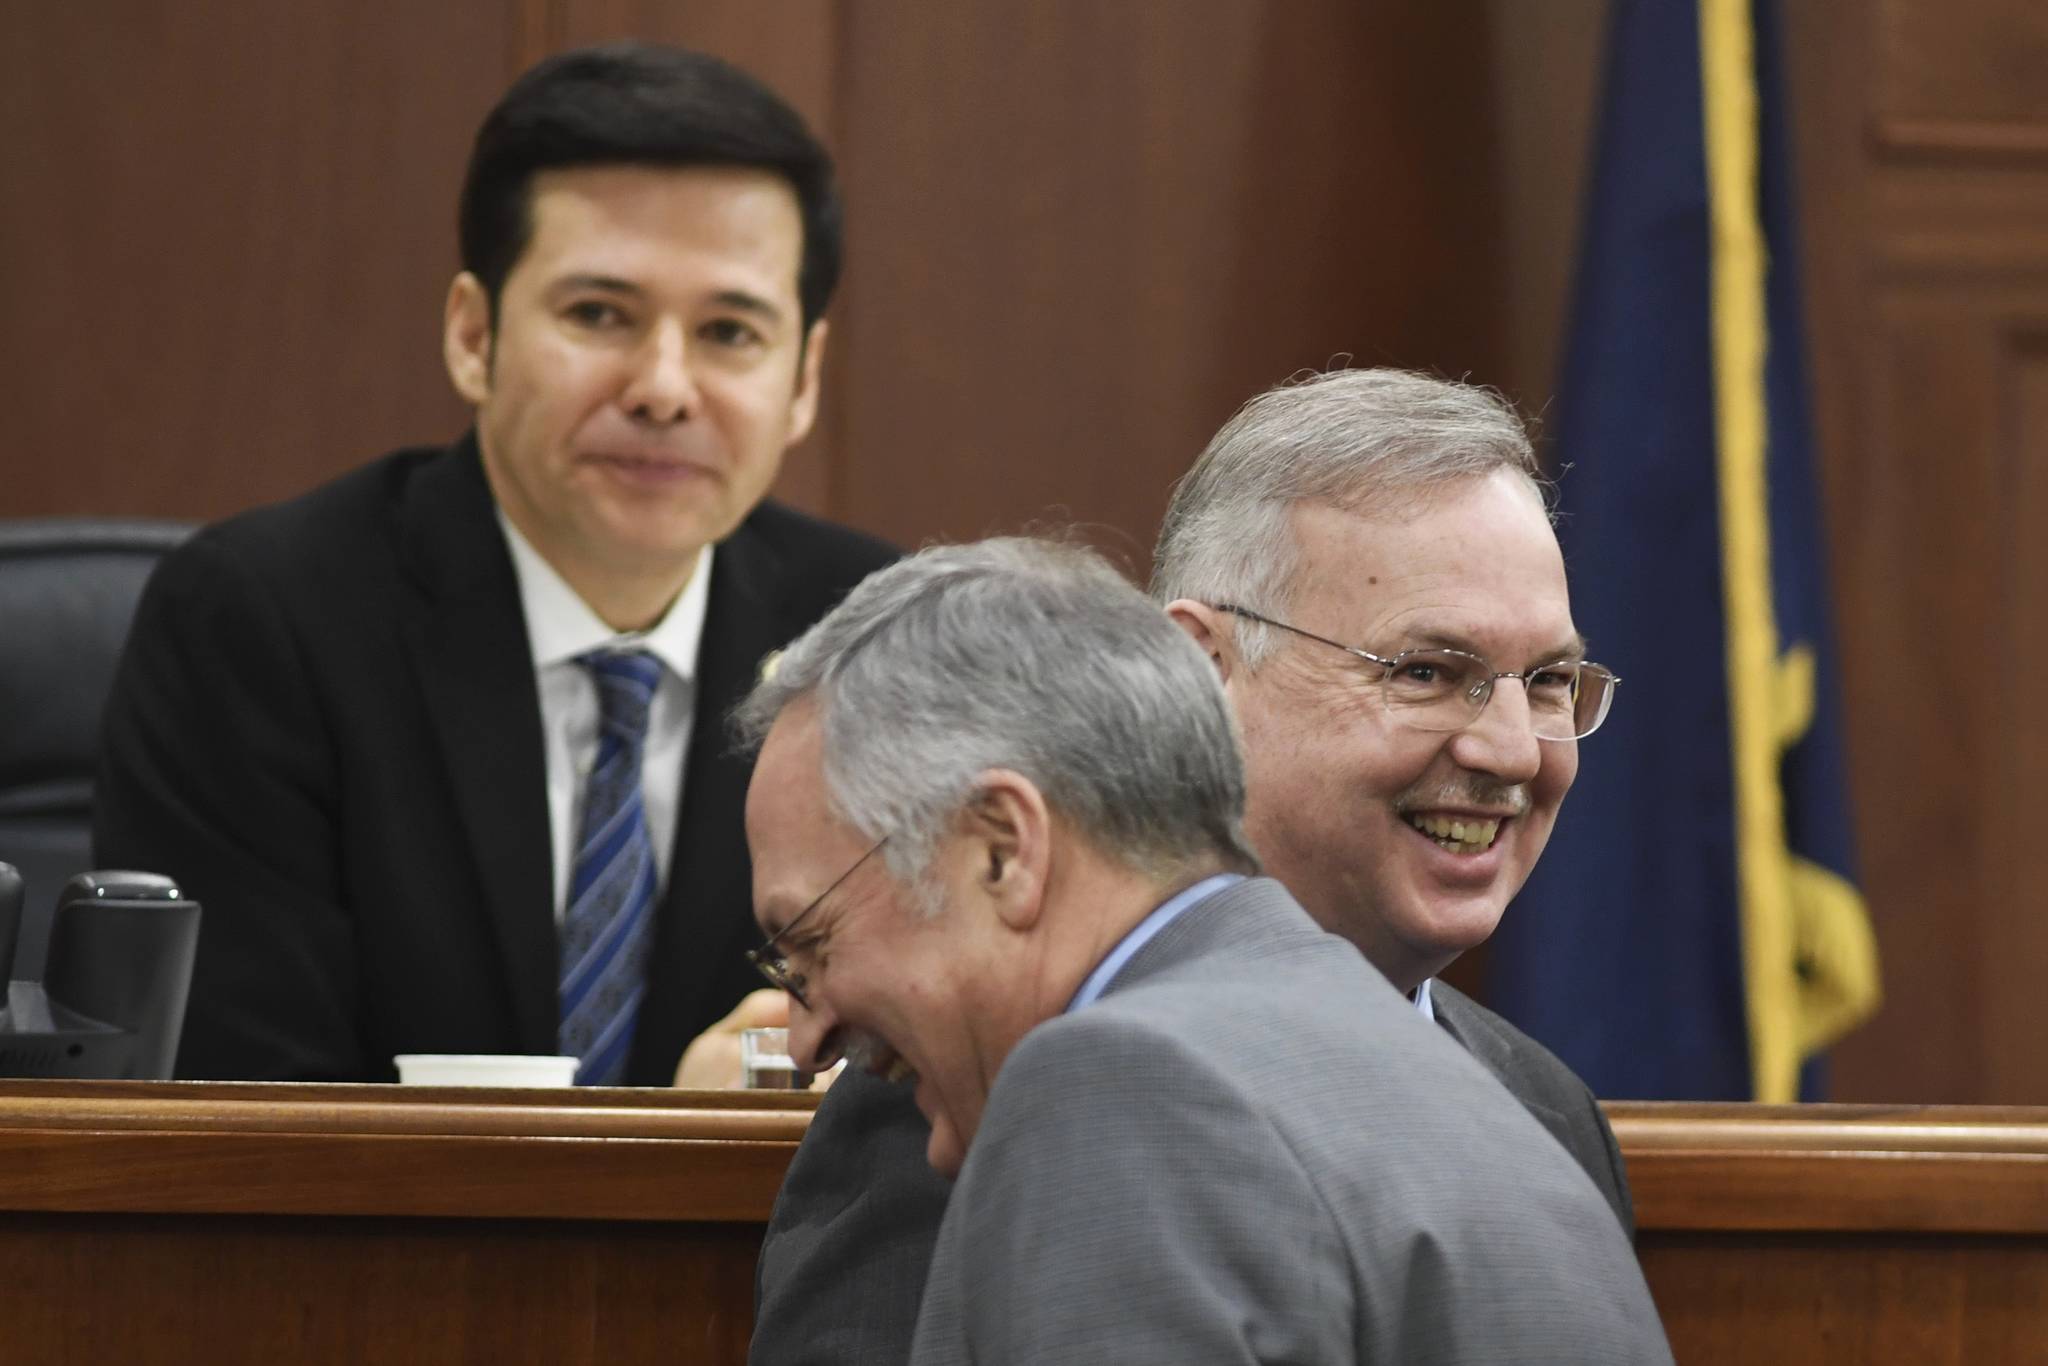 Former Speaker of the House Rep. Bryce Edgmon, D-Dillingham, right, shares a laugh with Speaker nominee Rep. David Talerico, R-Healy, at Speaker Pro Tempore Rep. Neal Foster, Nome, resides over the House on Monday, Feb. 4, 2019. The House continues in a stalemate to organize permanent leadership. (Michael Penn | Juneau Empire)